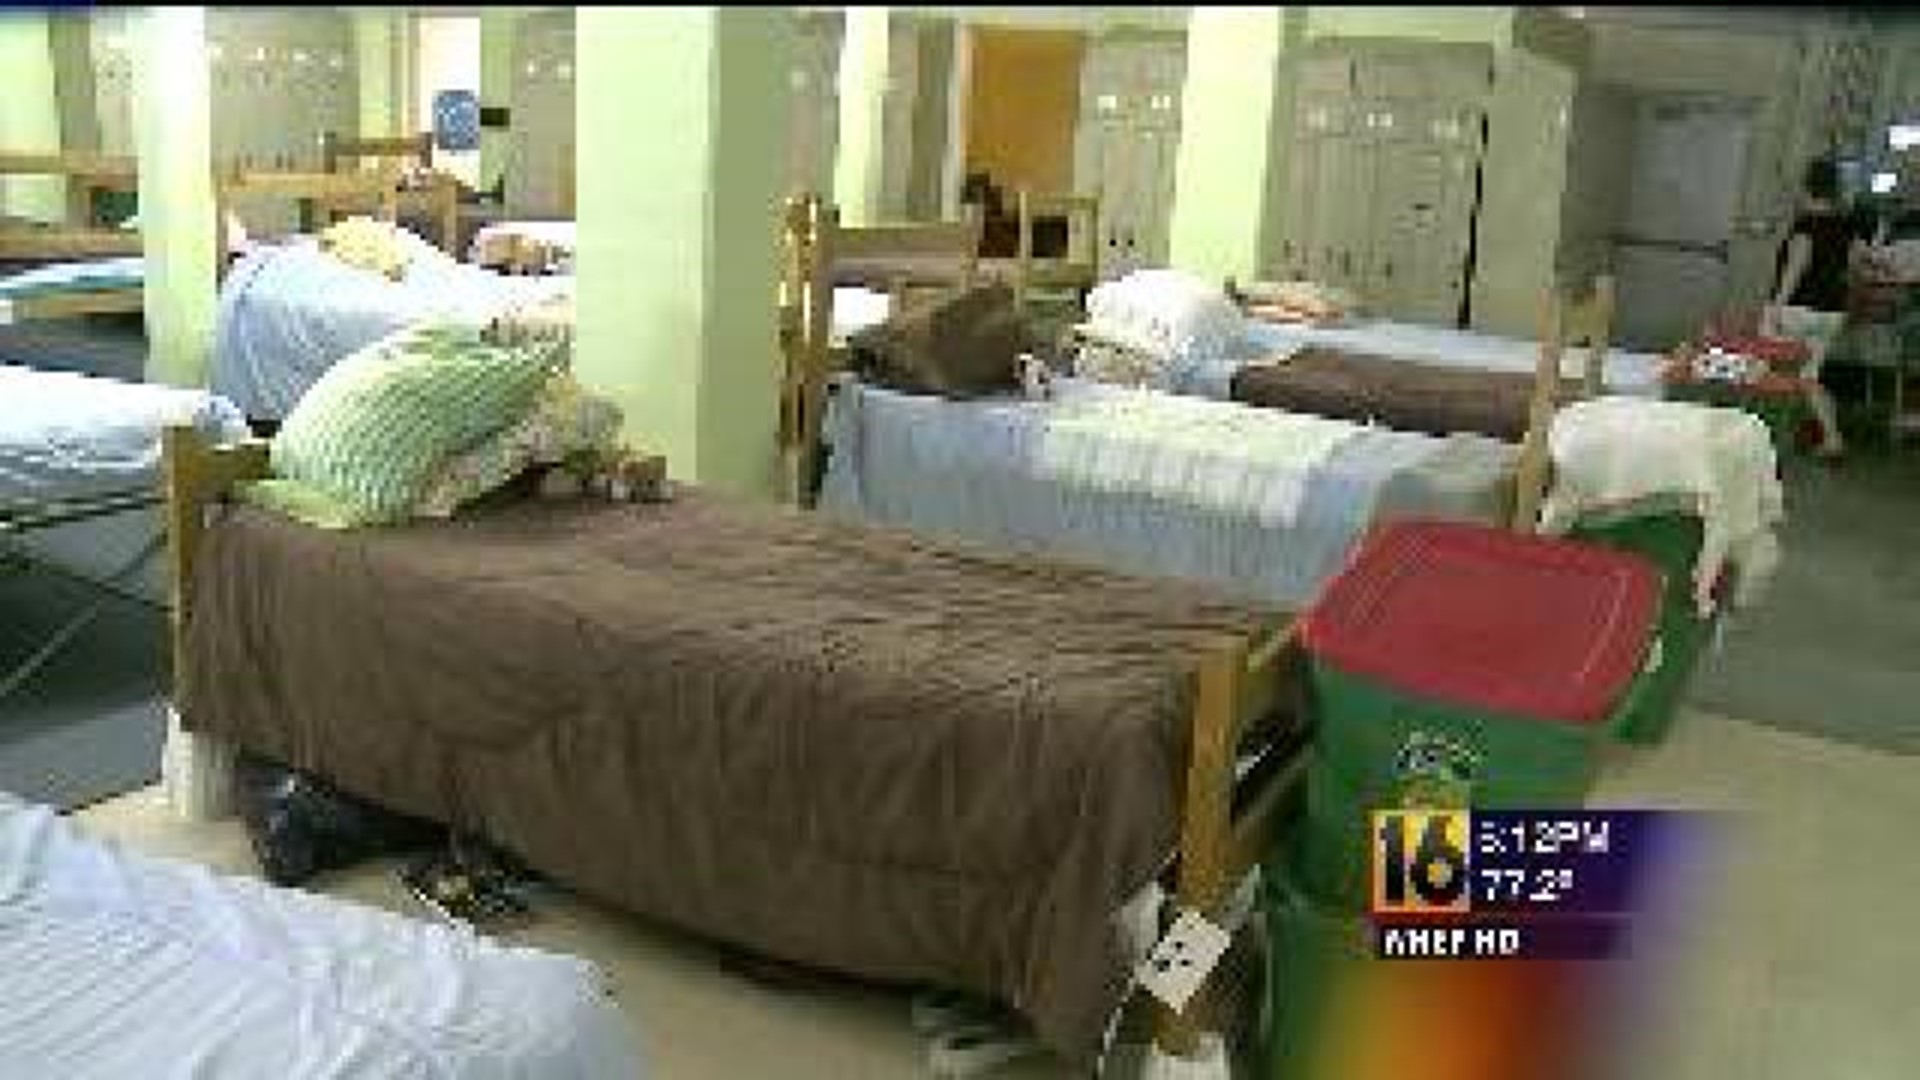 Women’s Shelter Merges as Wait Continues for Funding